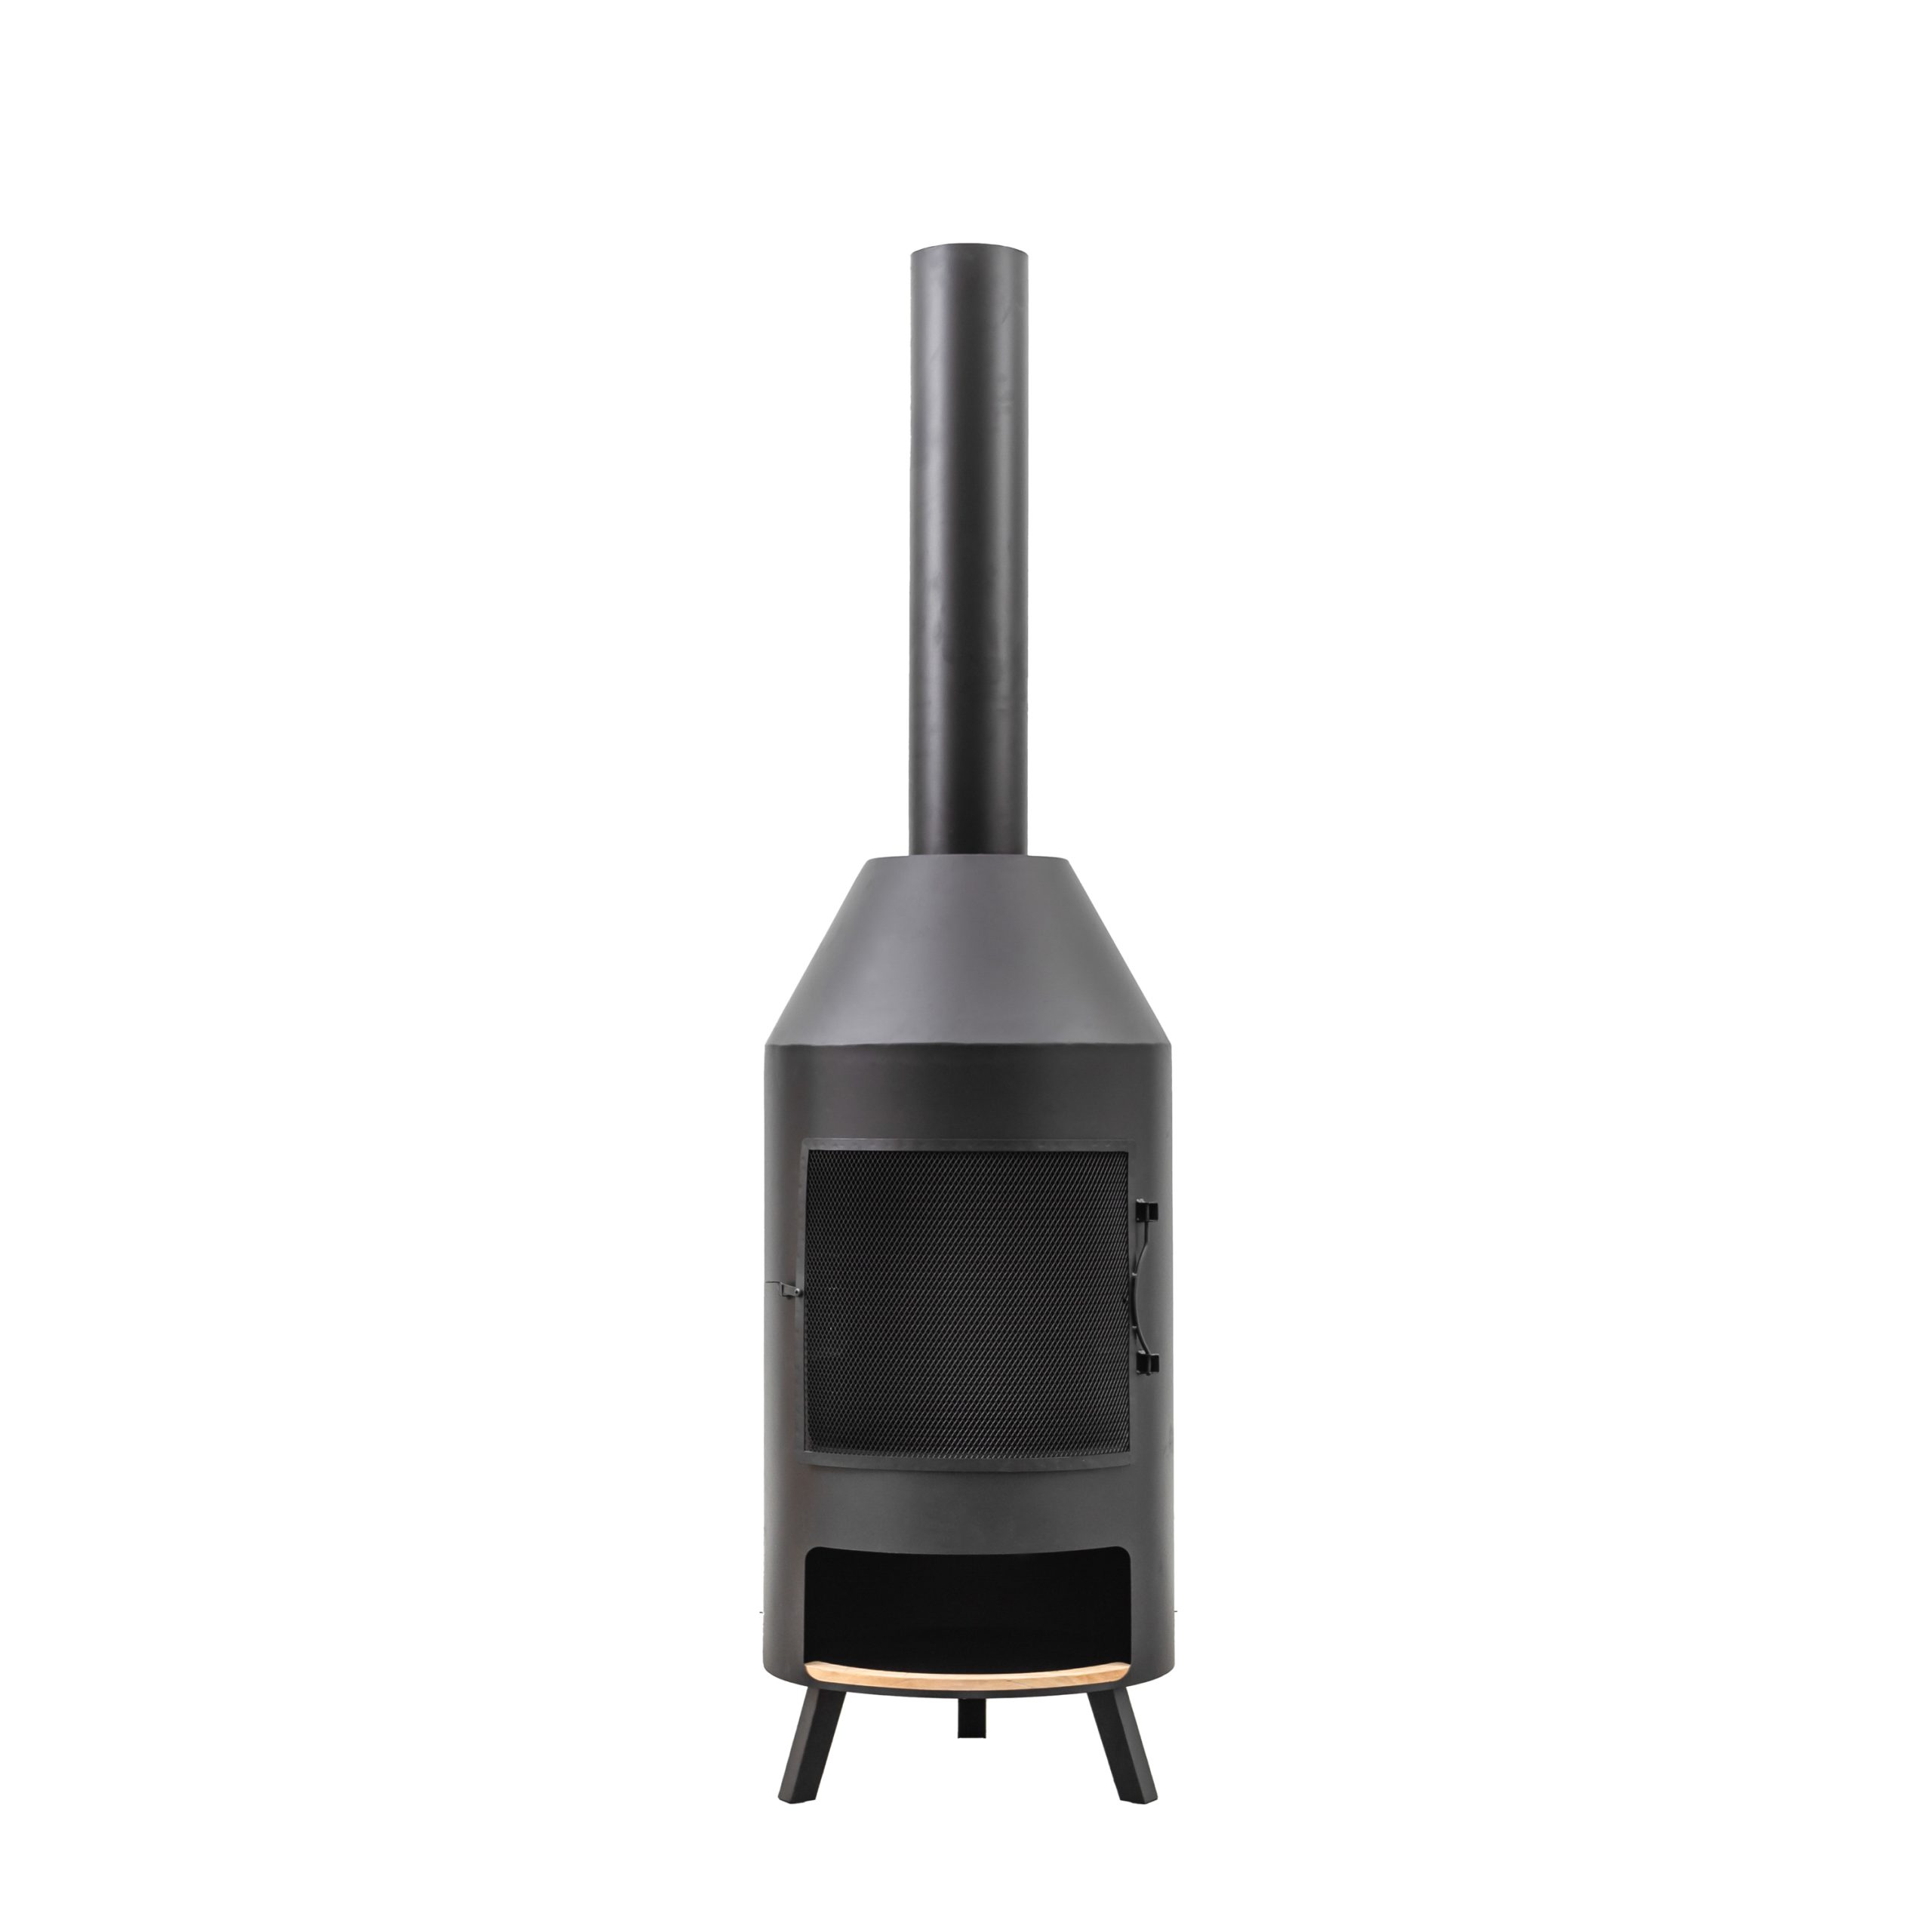 Gallery Outdoor Firenze Chiminea with Pizza Shelf 500x500x1835mm